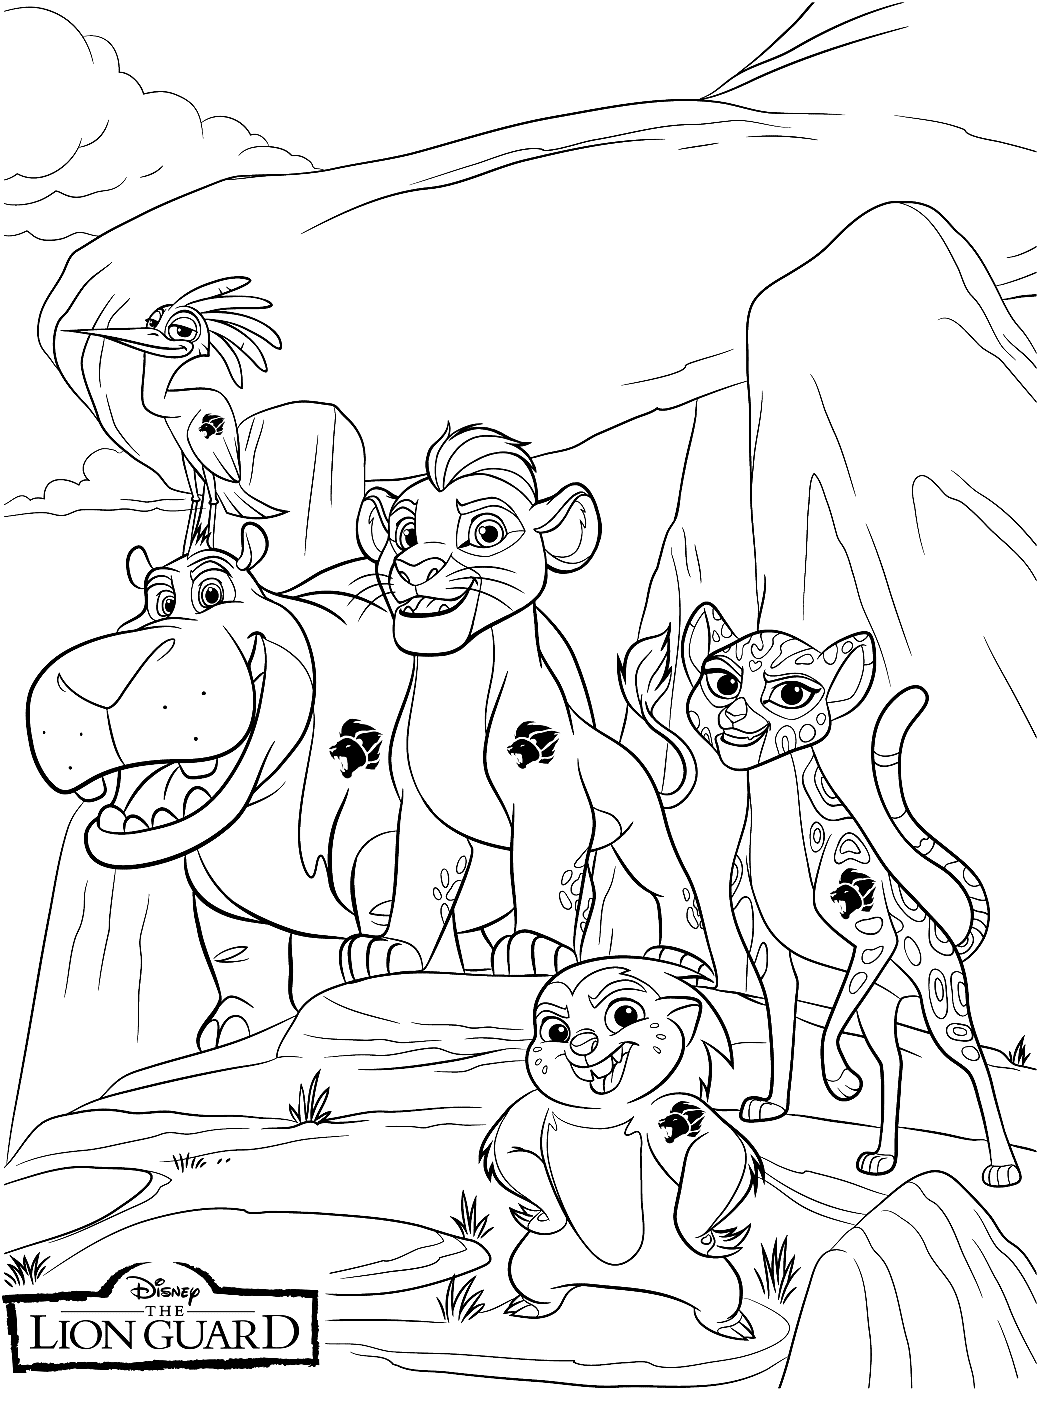 Meet The Lion Guard Coloring Pages